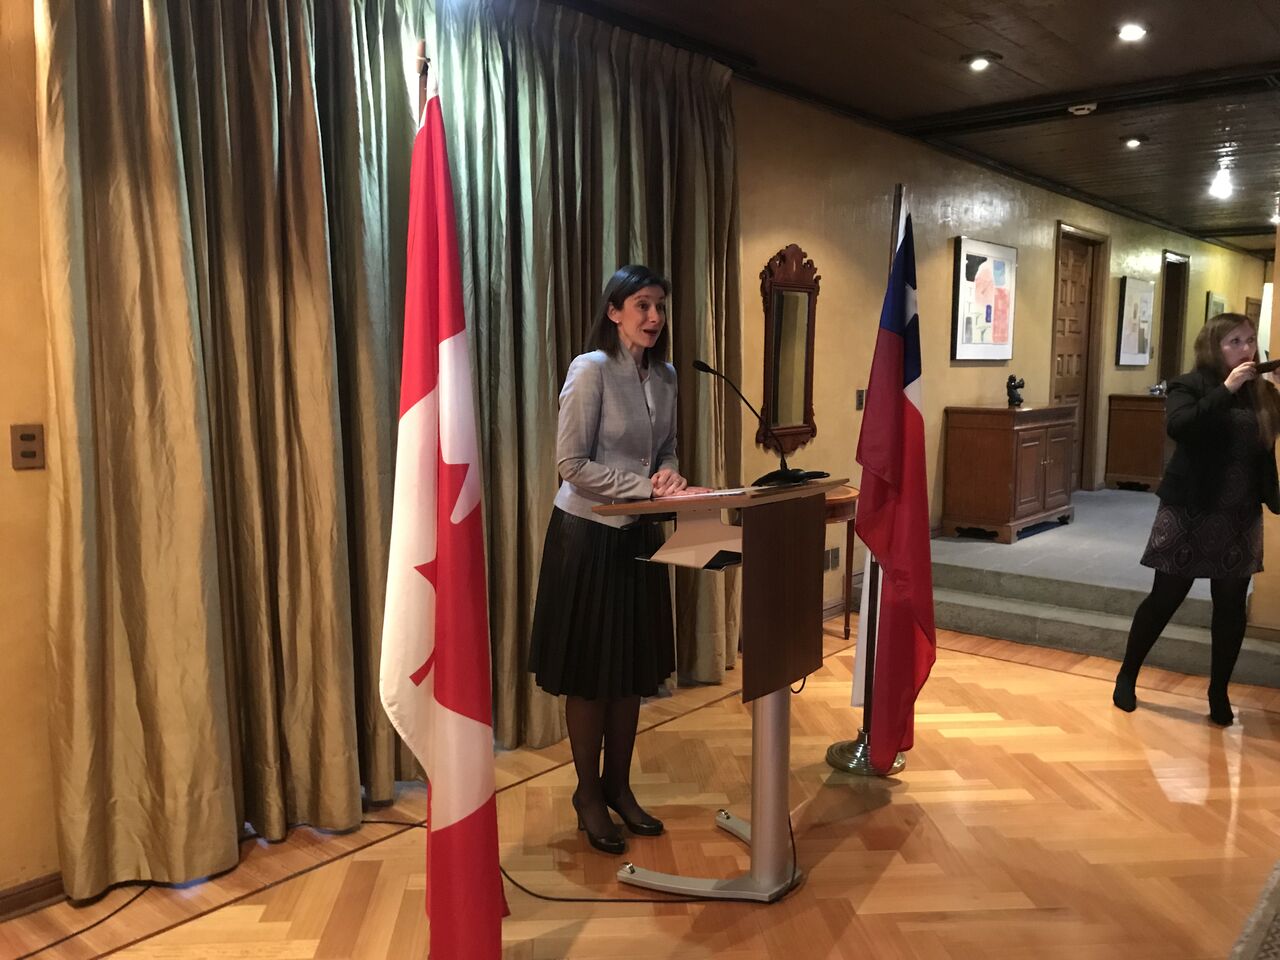 Languages Canada reports on the success of its trade mission to Chile